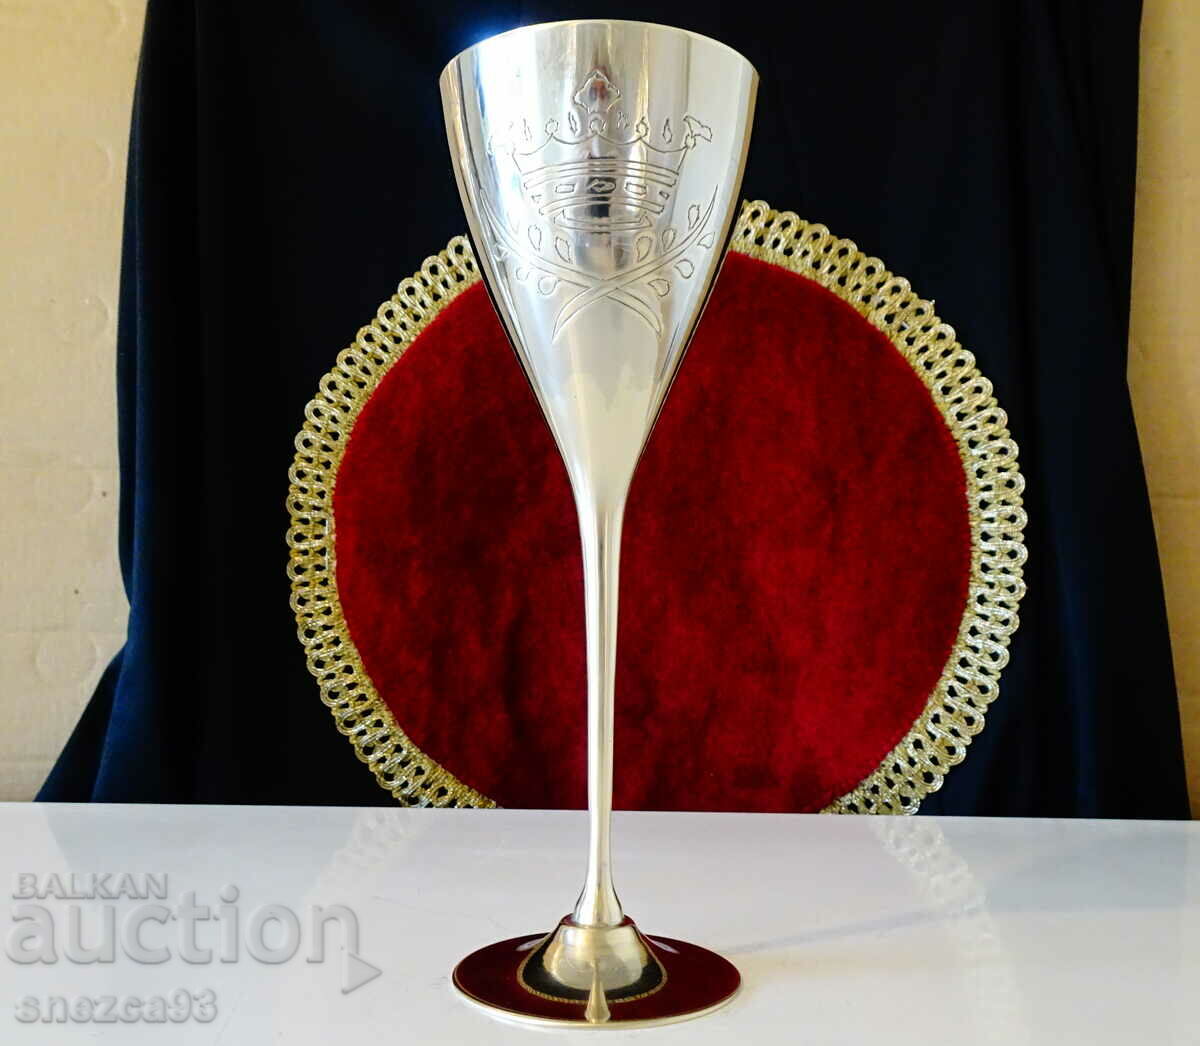 Bronze goblet with royal crown and laurel wreath.